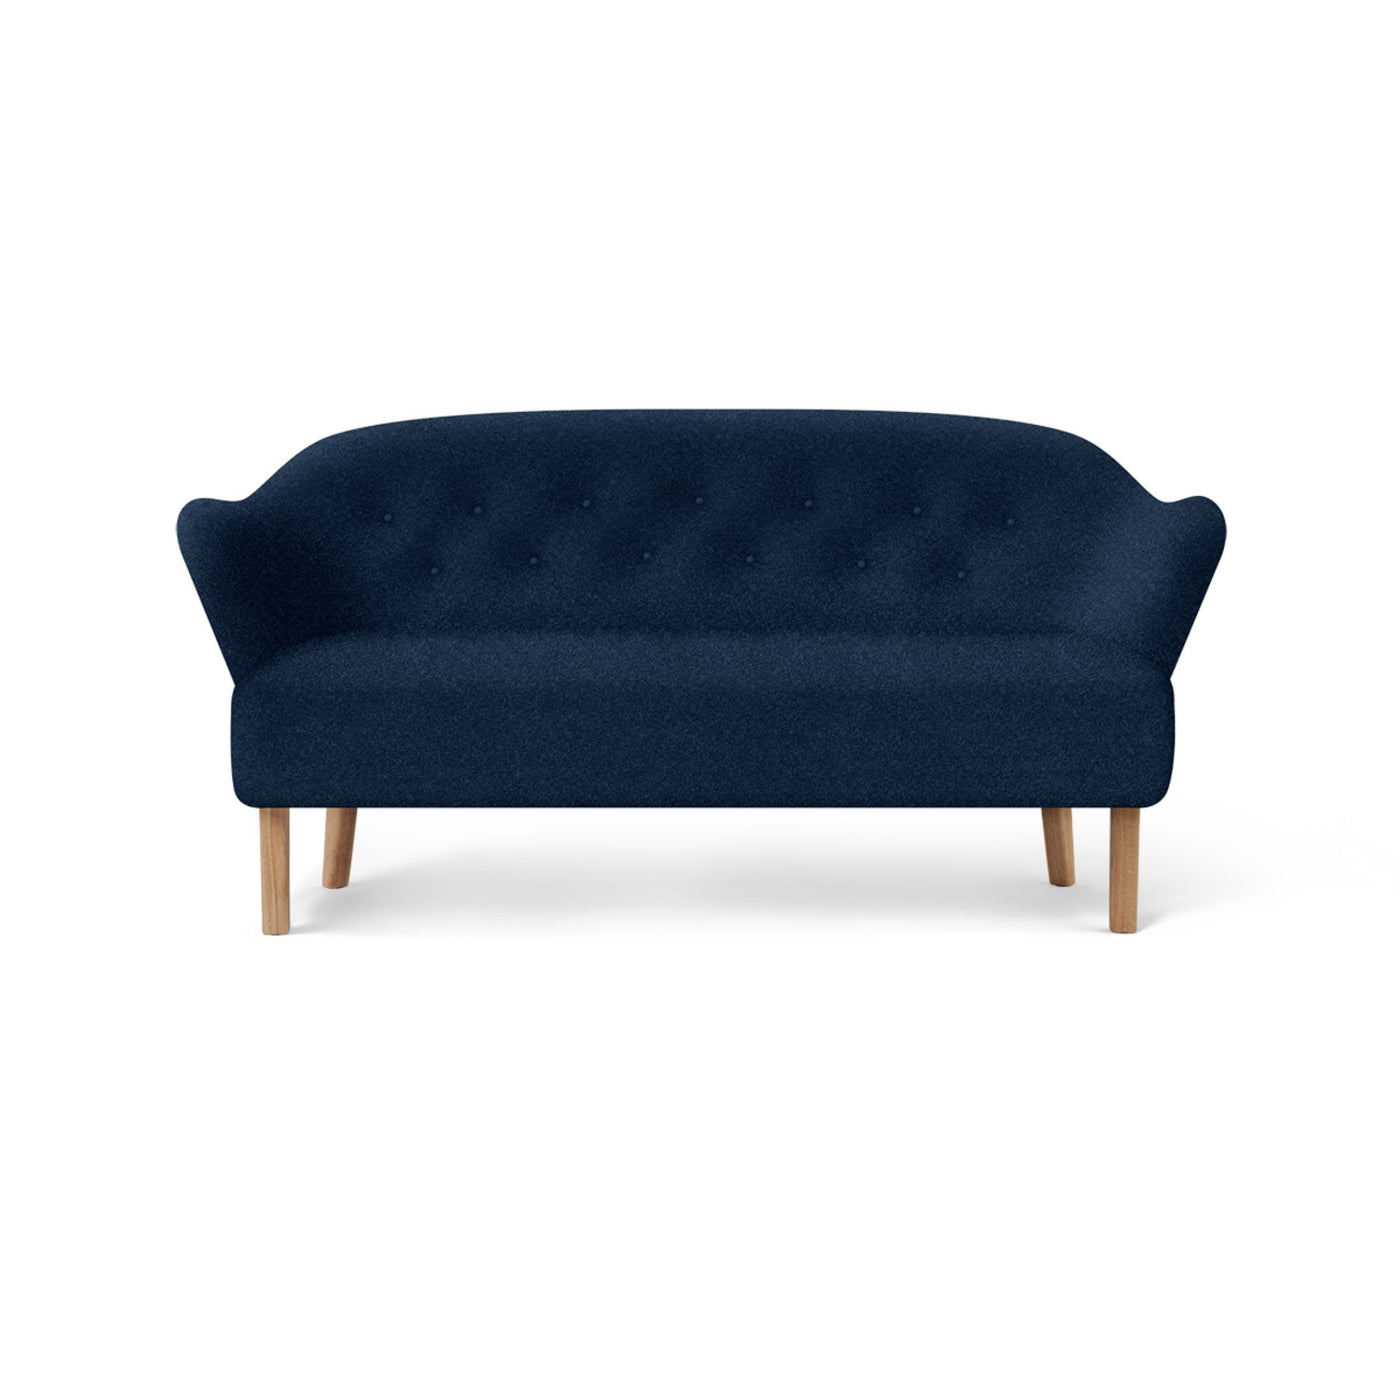 By Lassen Ingeborg sofa with natural oak legs. Made to order from someday designs. #colour_hallingdal-764